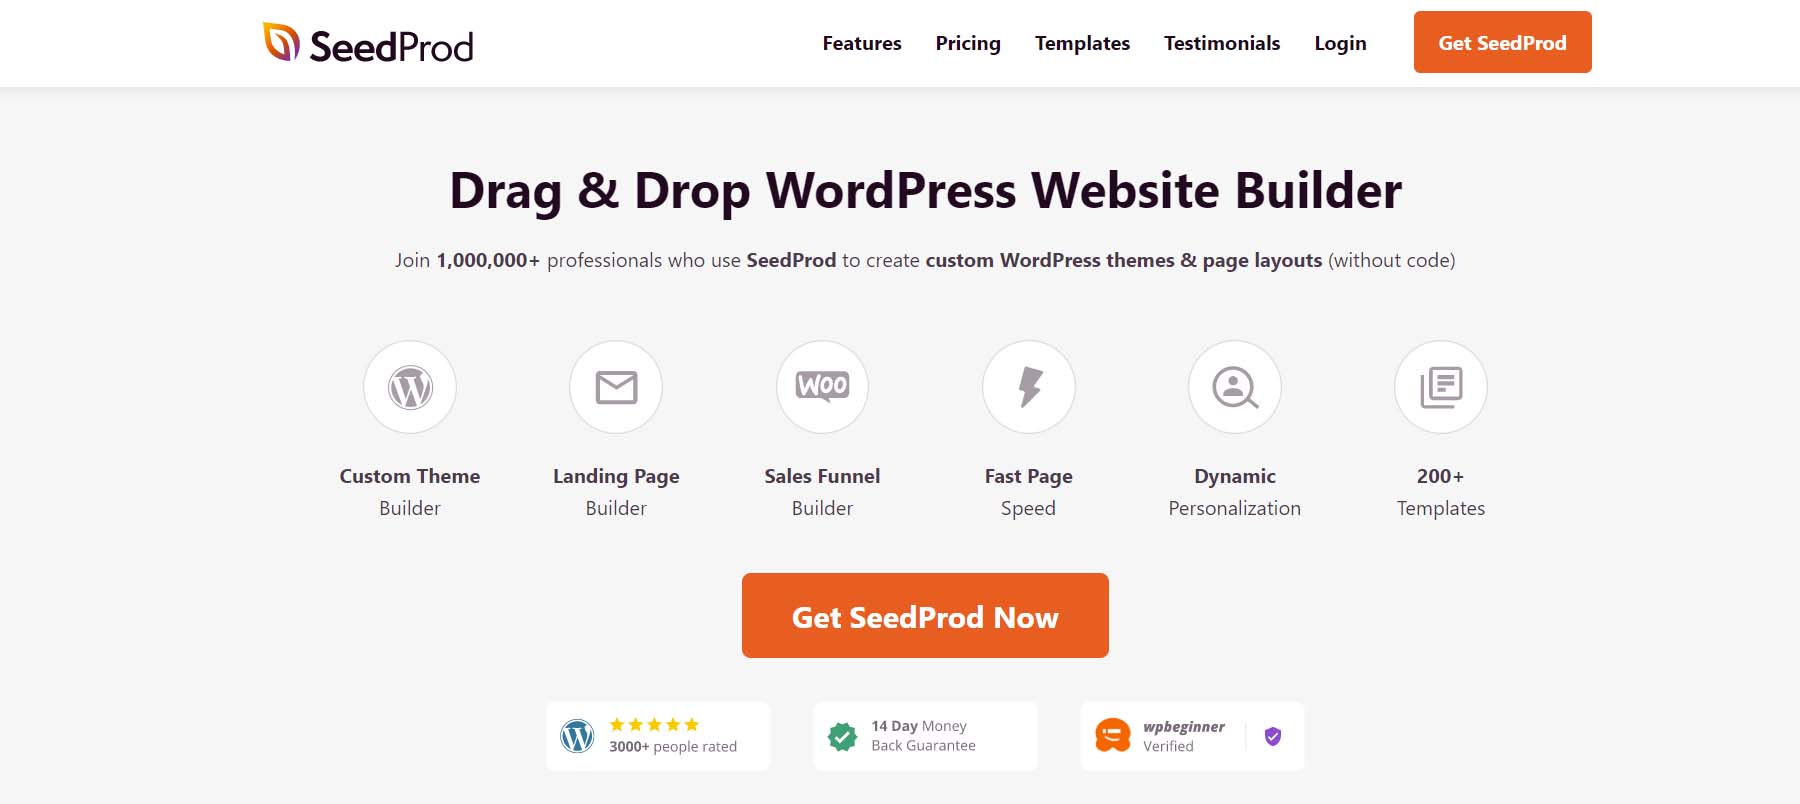 SeedProd, a WordPress page builder for digital marketers and solopreneurs